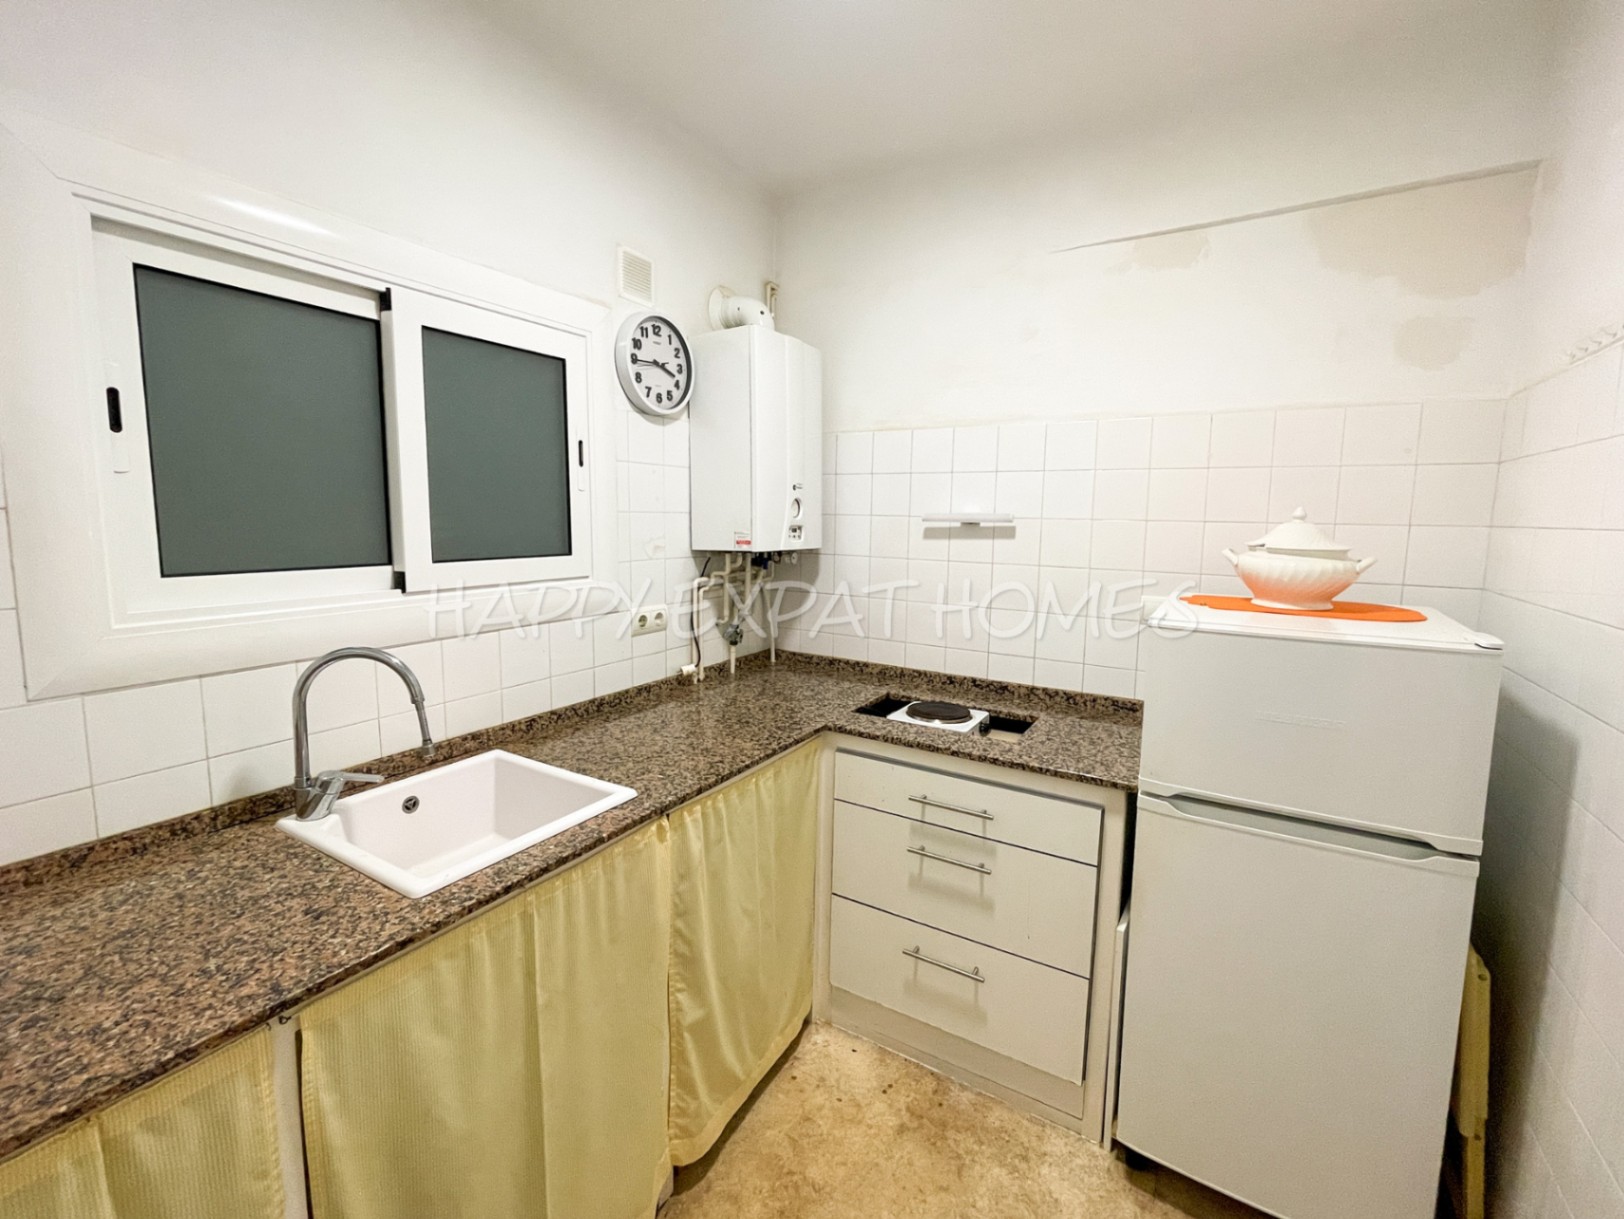 Flat in Sitges centre close to the beach